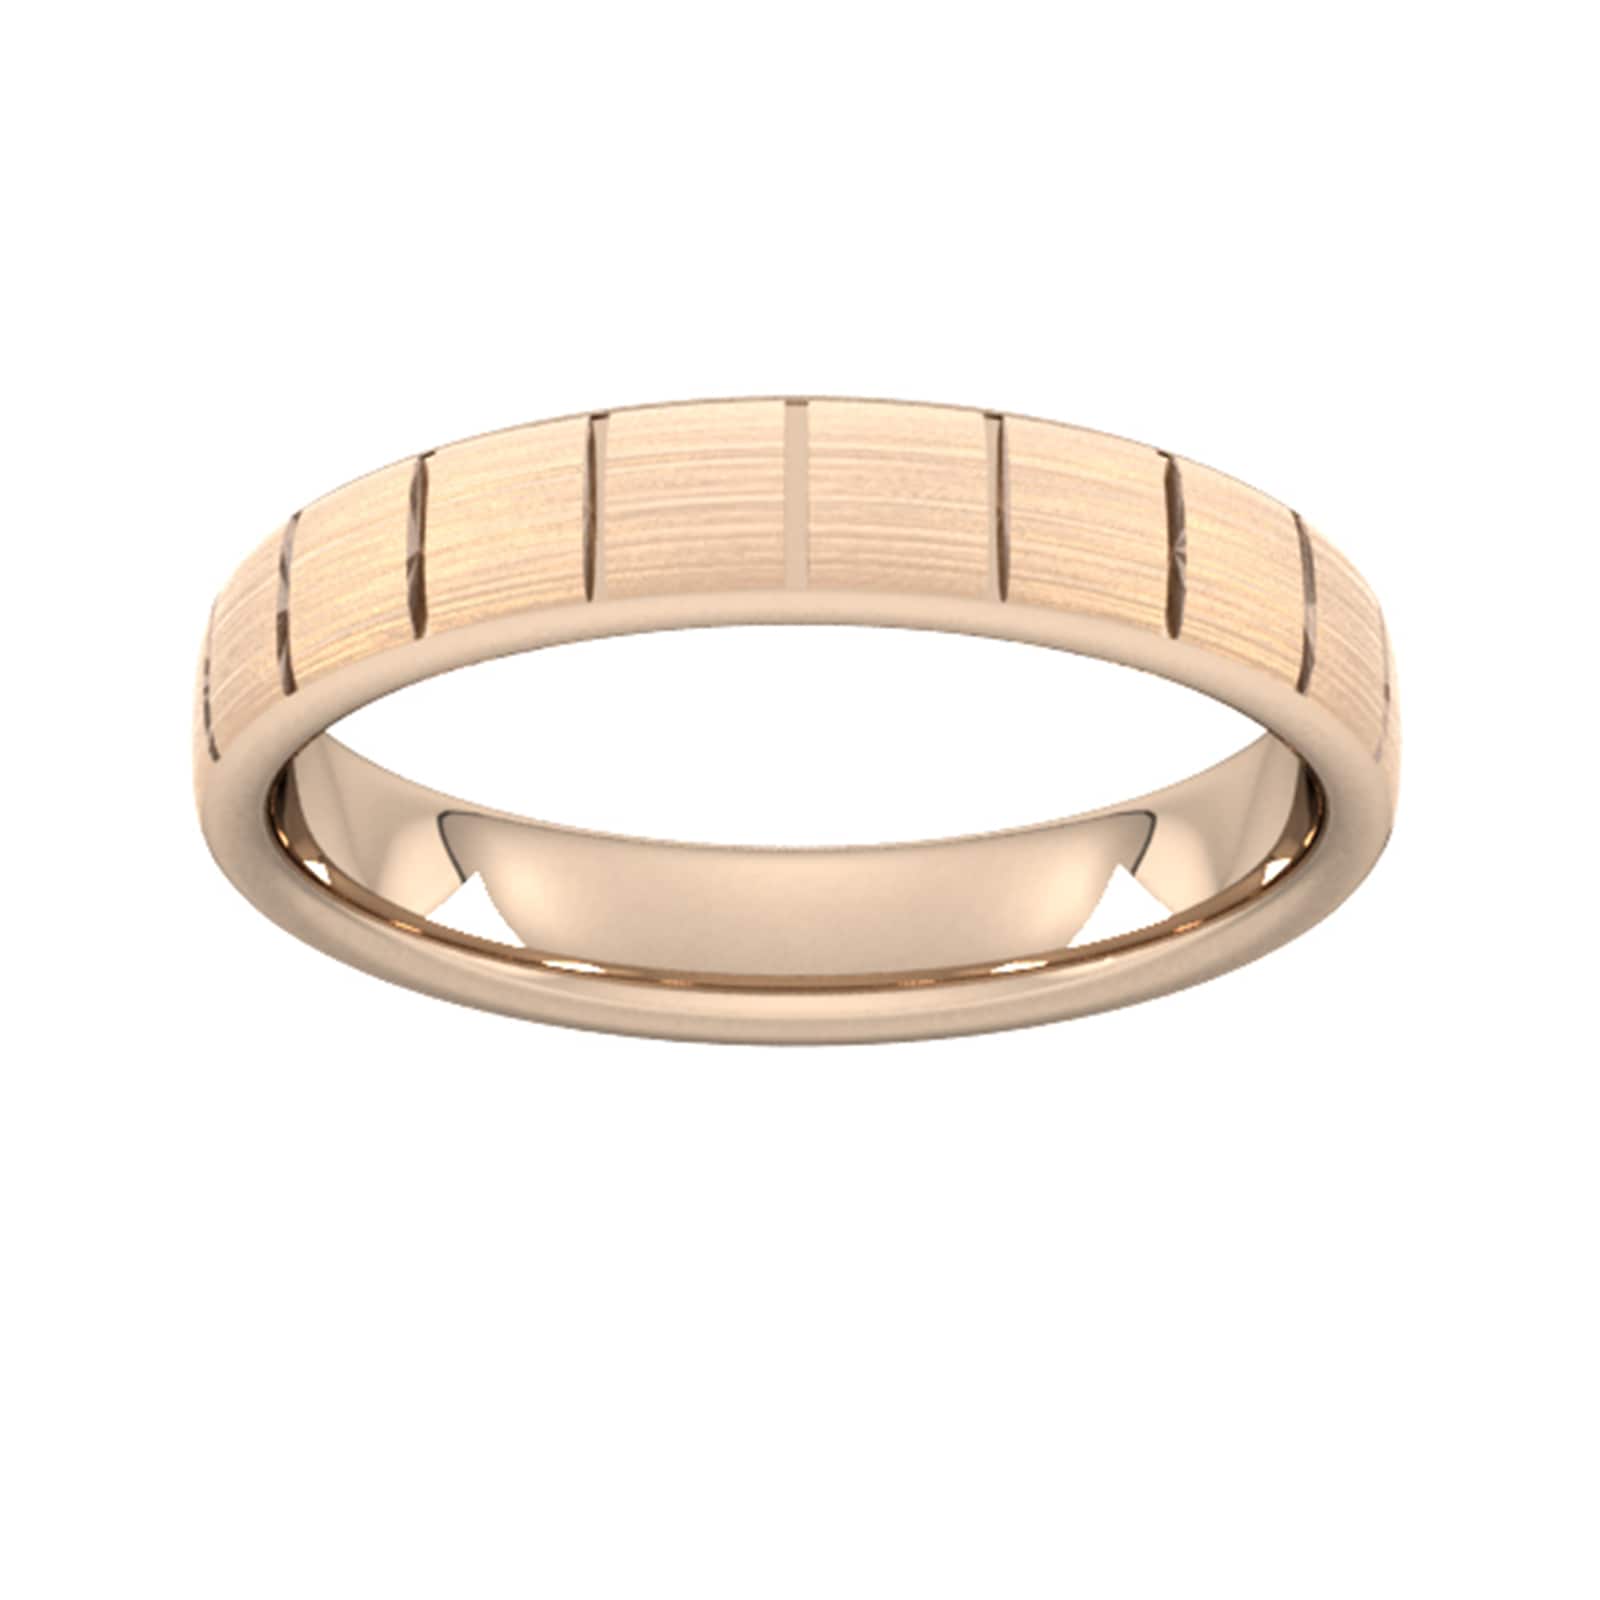 4mm D Shape Heavy Vertical Lines Wedding Ring In 9 Carat Rose Gold - Ring Size H